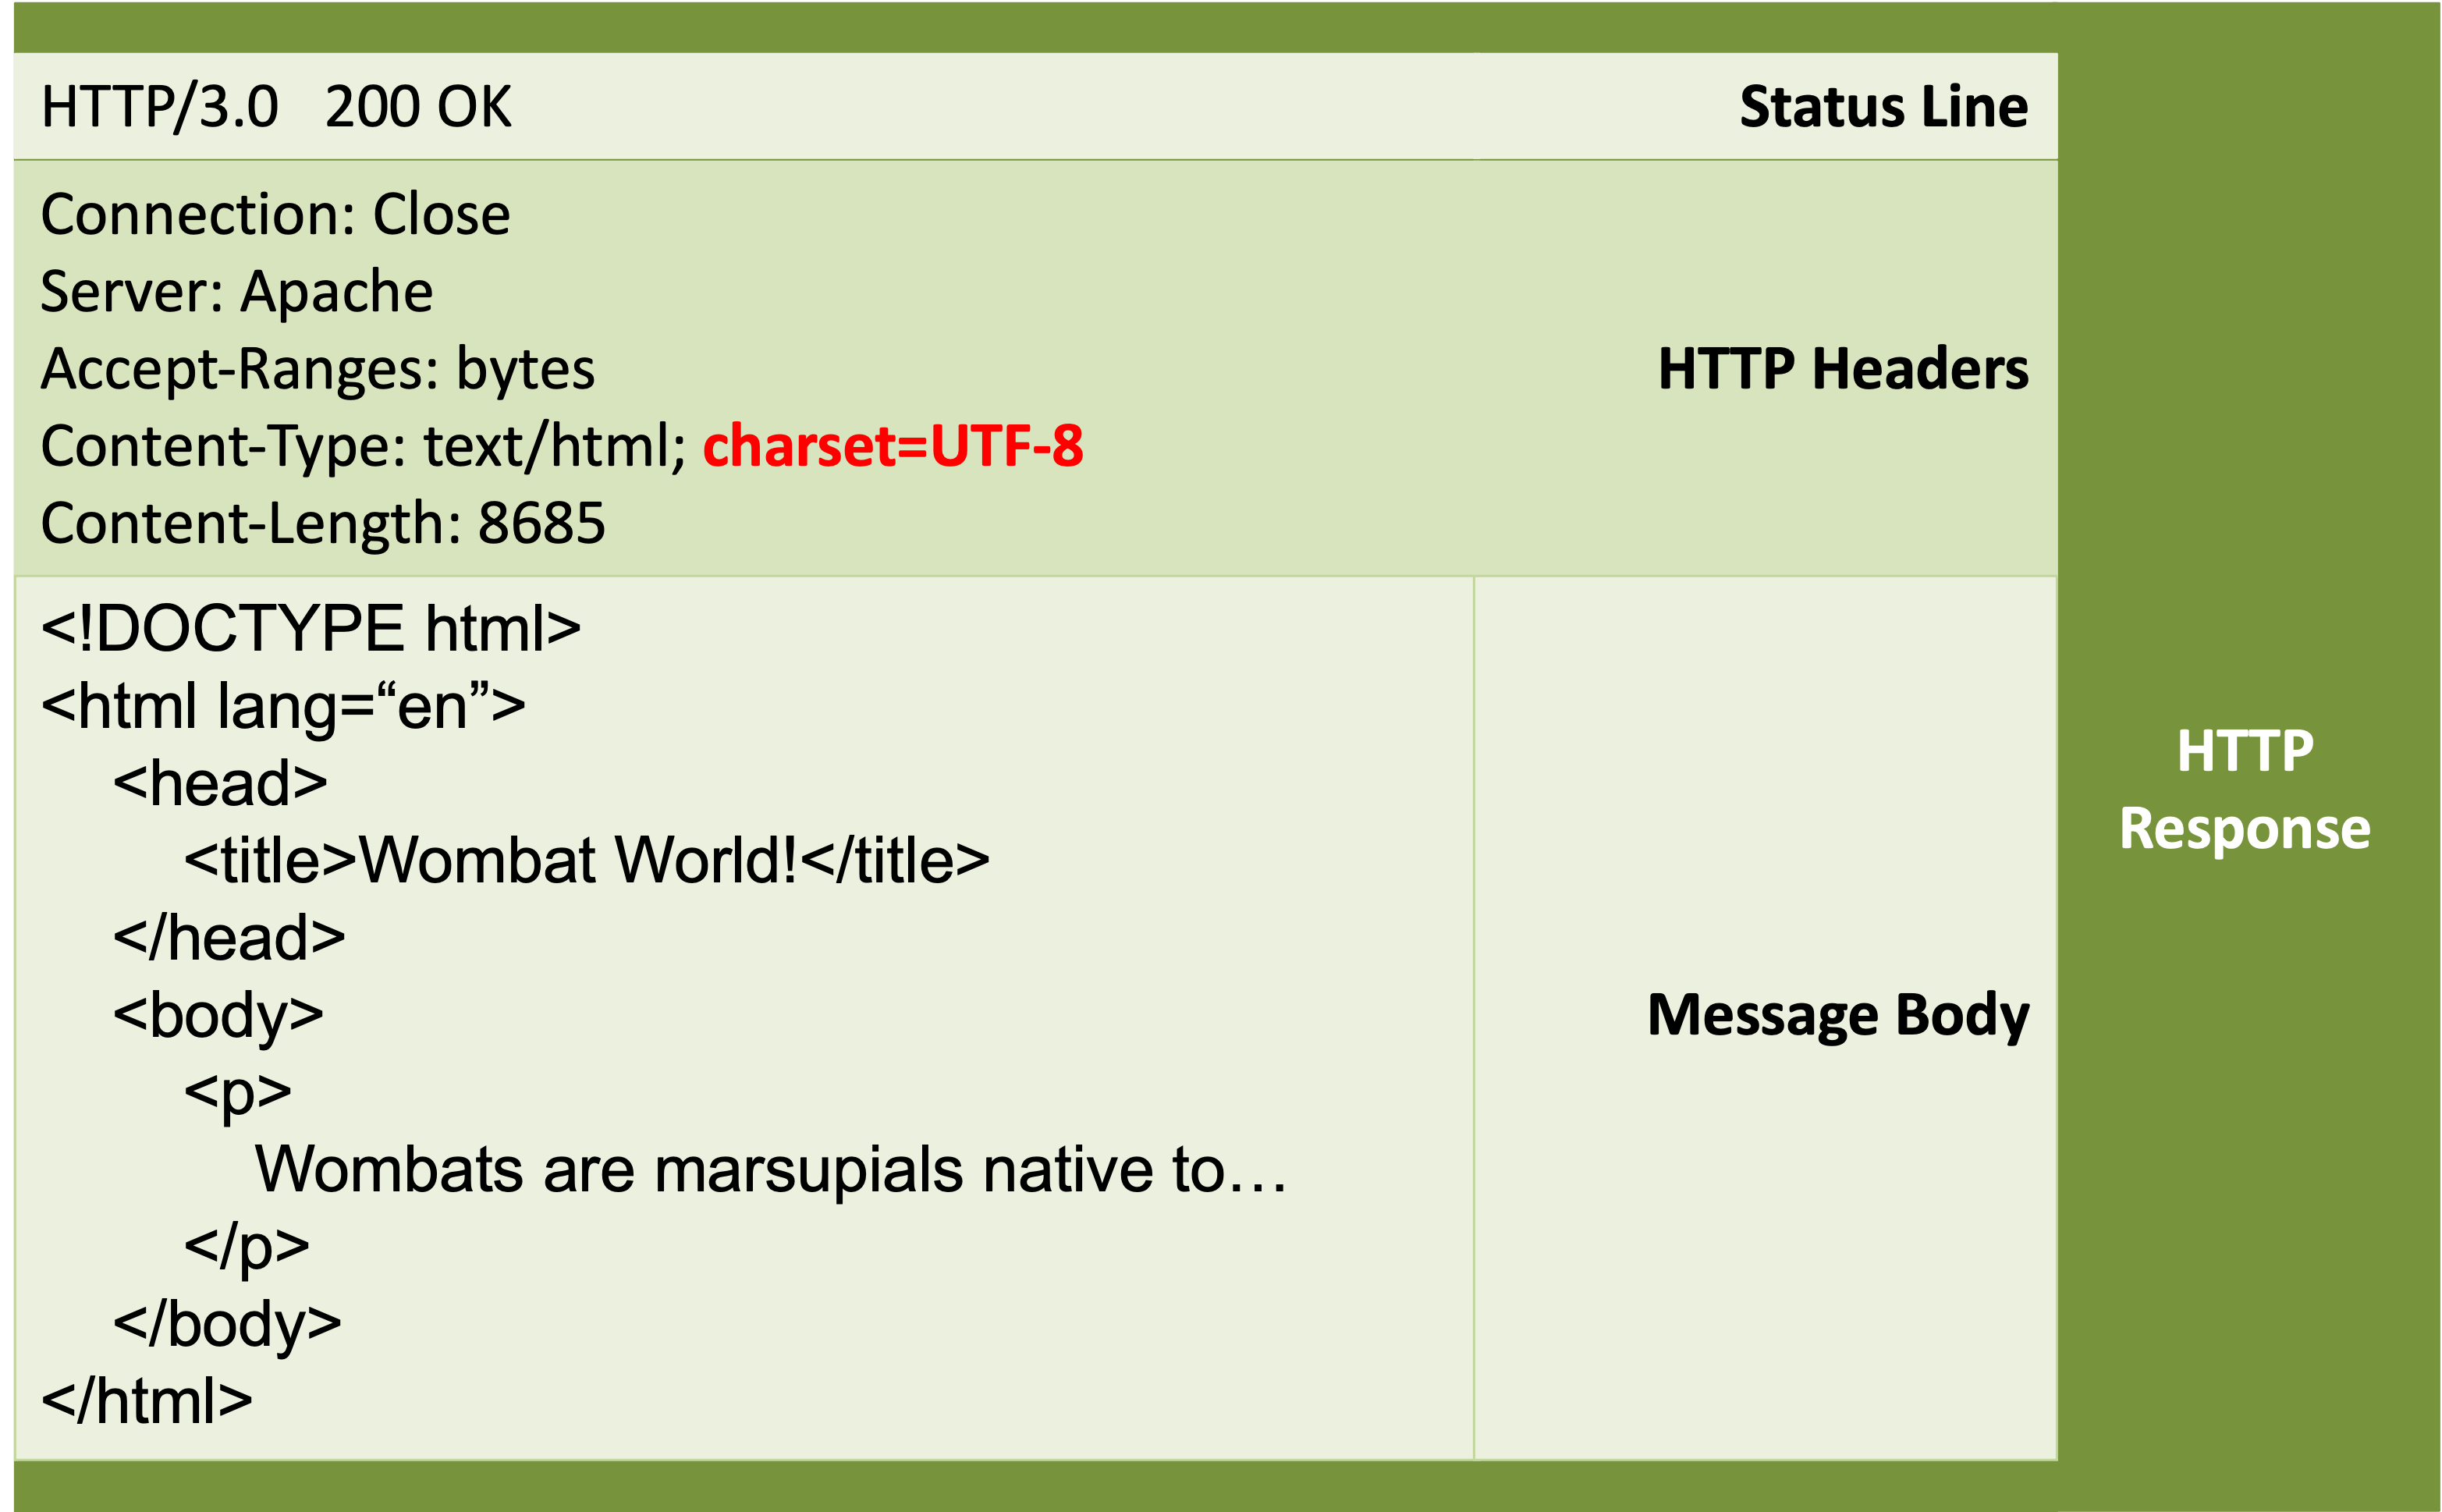 An HTTP response can specify the charset in the Content-Type header